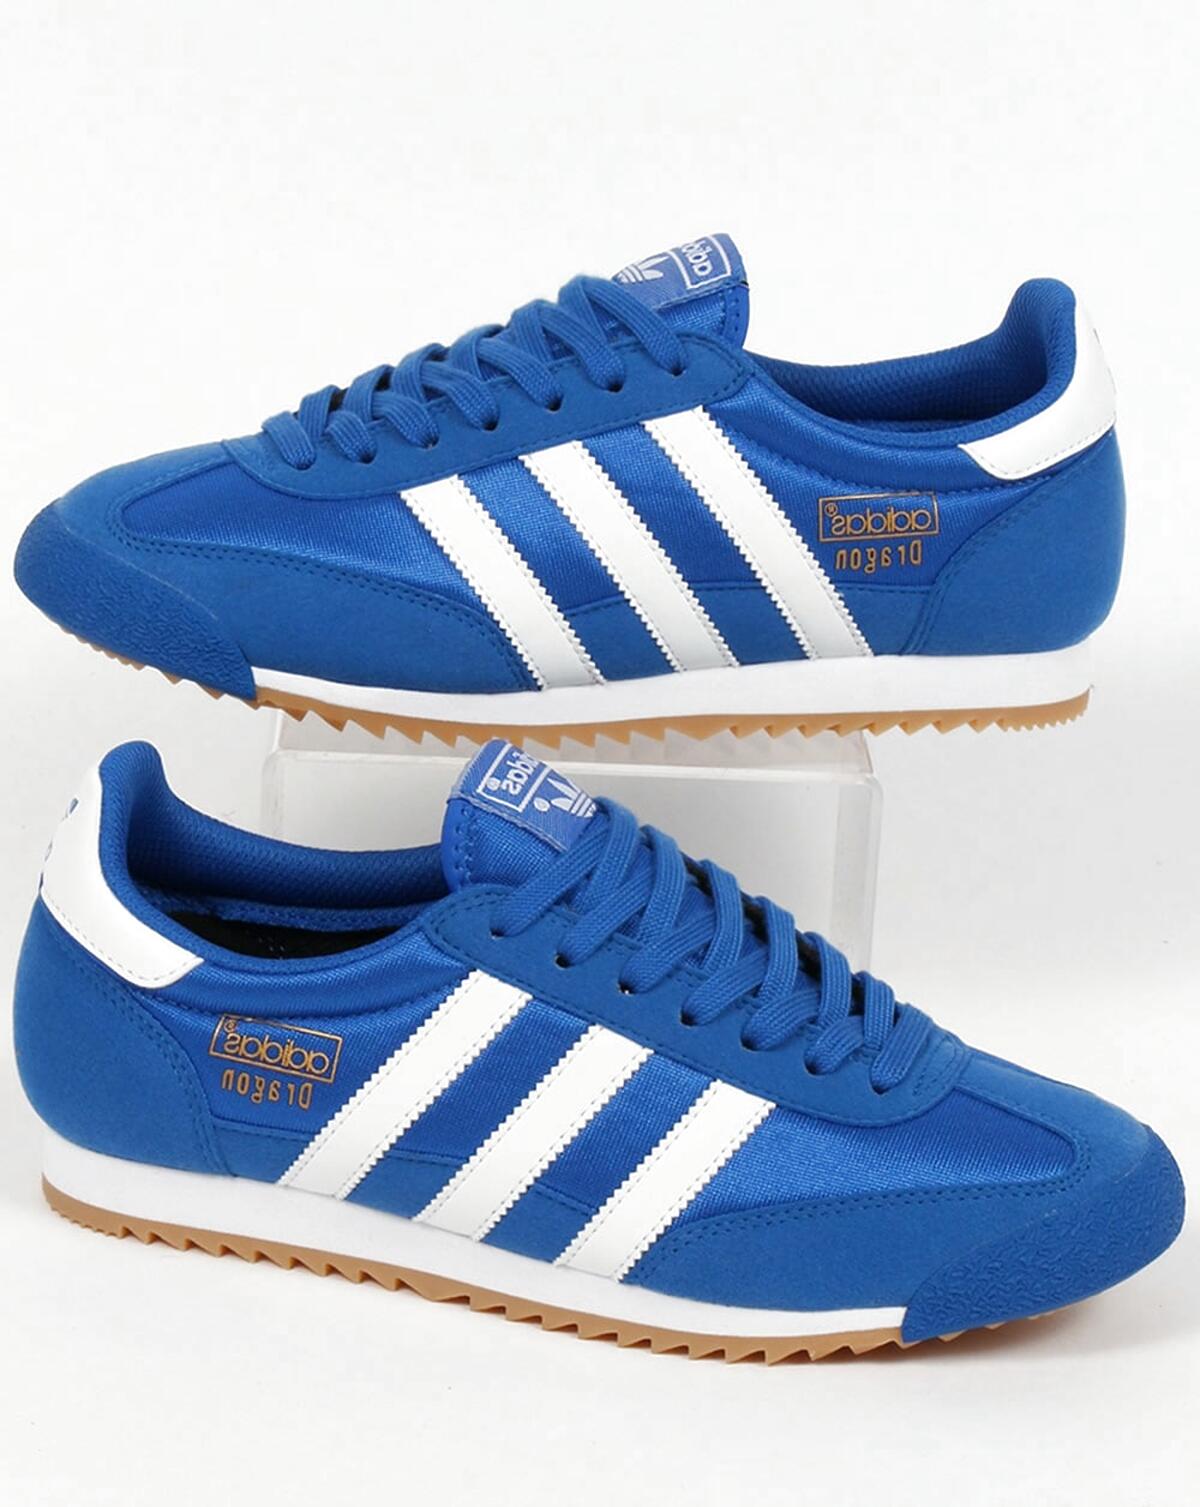 old skool adidas trainers cheap online